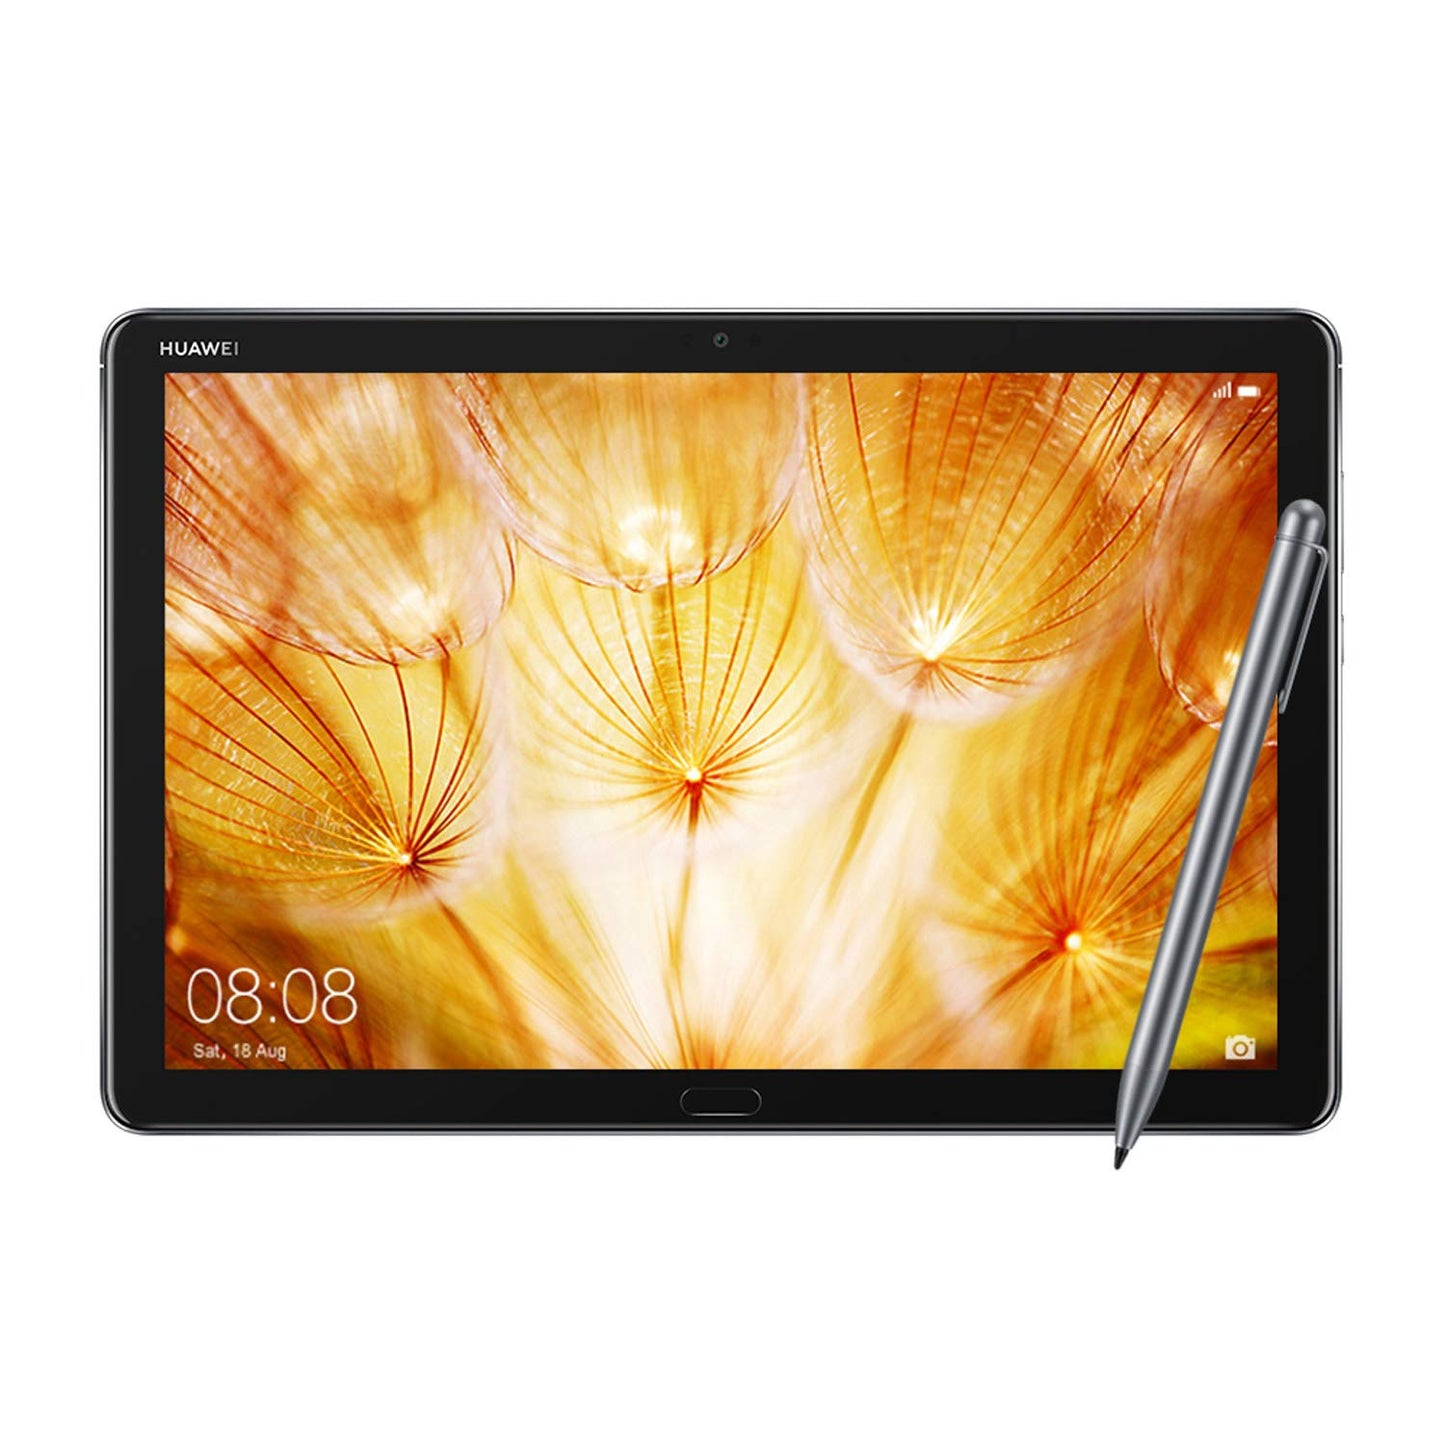 Huawei MediaPad M5 Lite Android Tablet with 10.1" FHD Display